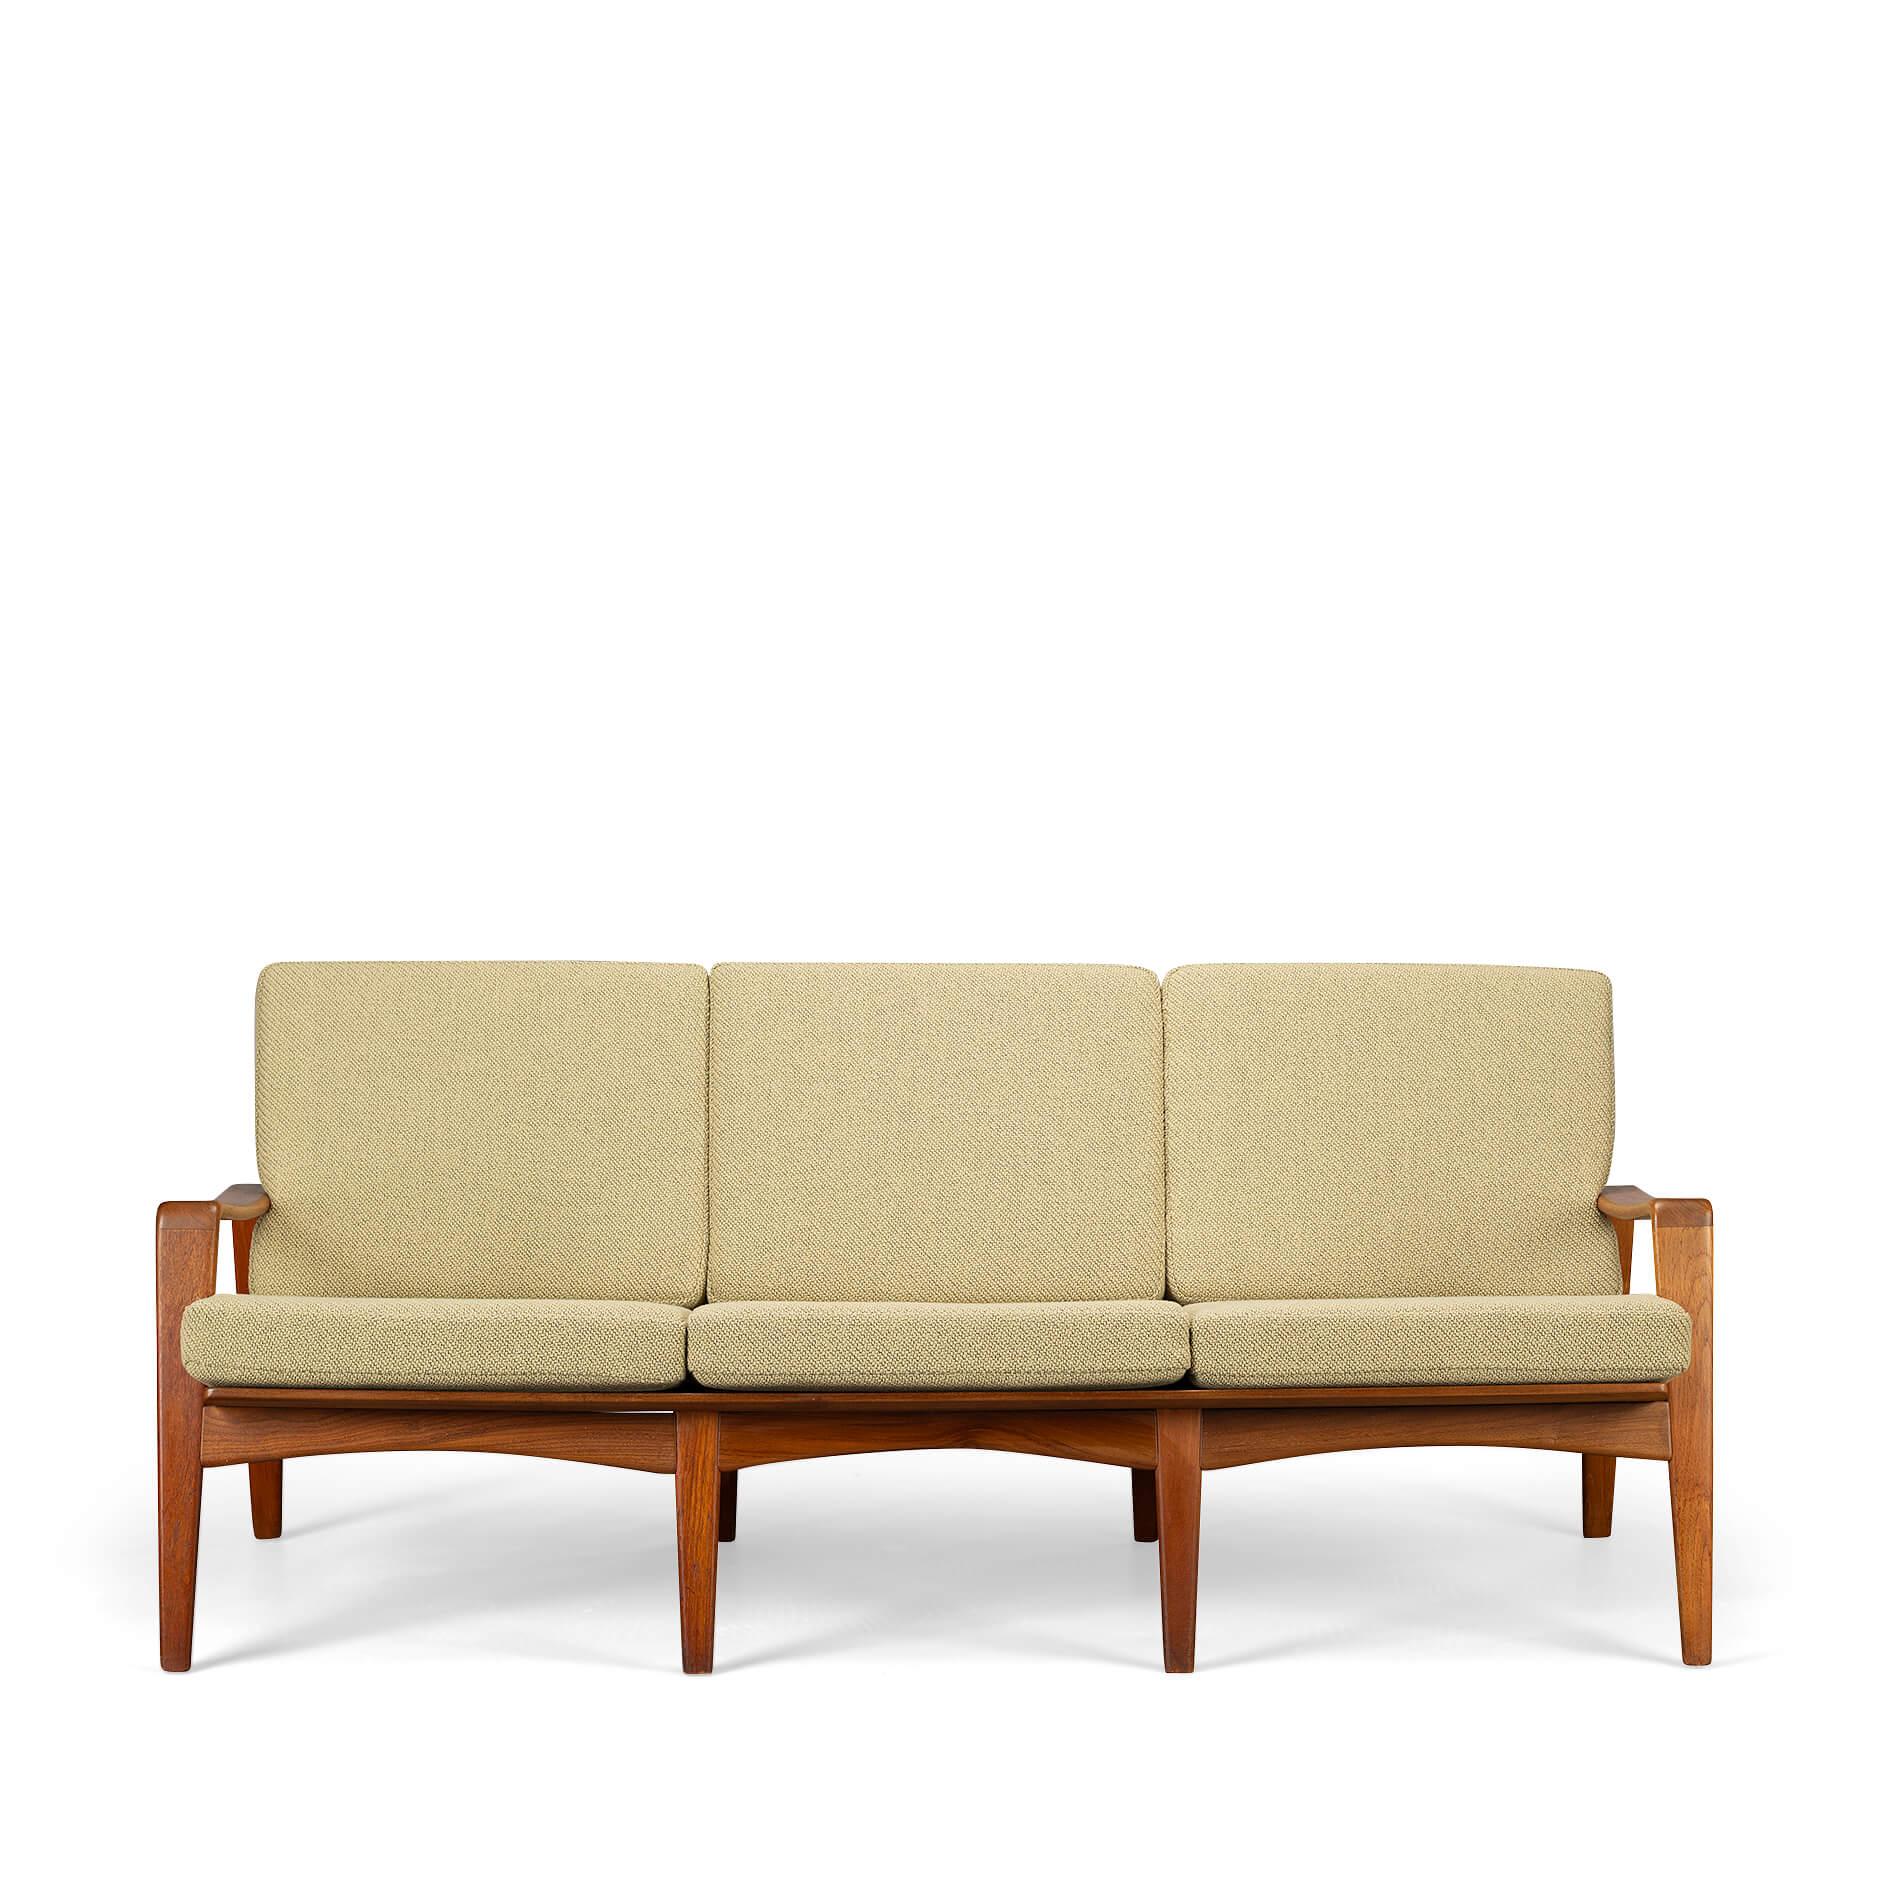 Vintage design sofa
Sofa model no. 35 designed by Arne Wahl Iversen, manufactured by Komfort, Denmark, 1960. This comfortable sofa with impressive woodwork on the back is made out of solid teak and is equipped with new upholstery. As indicated it